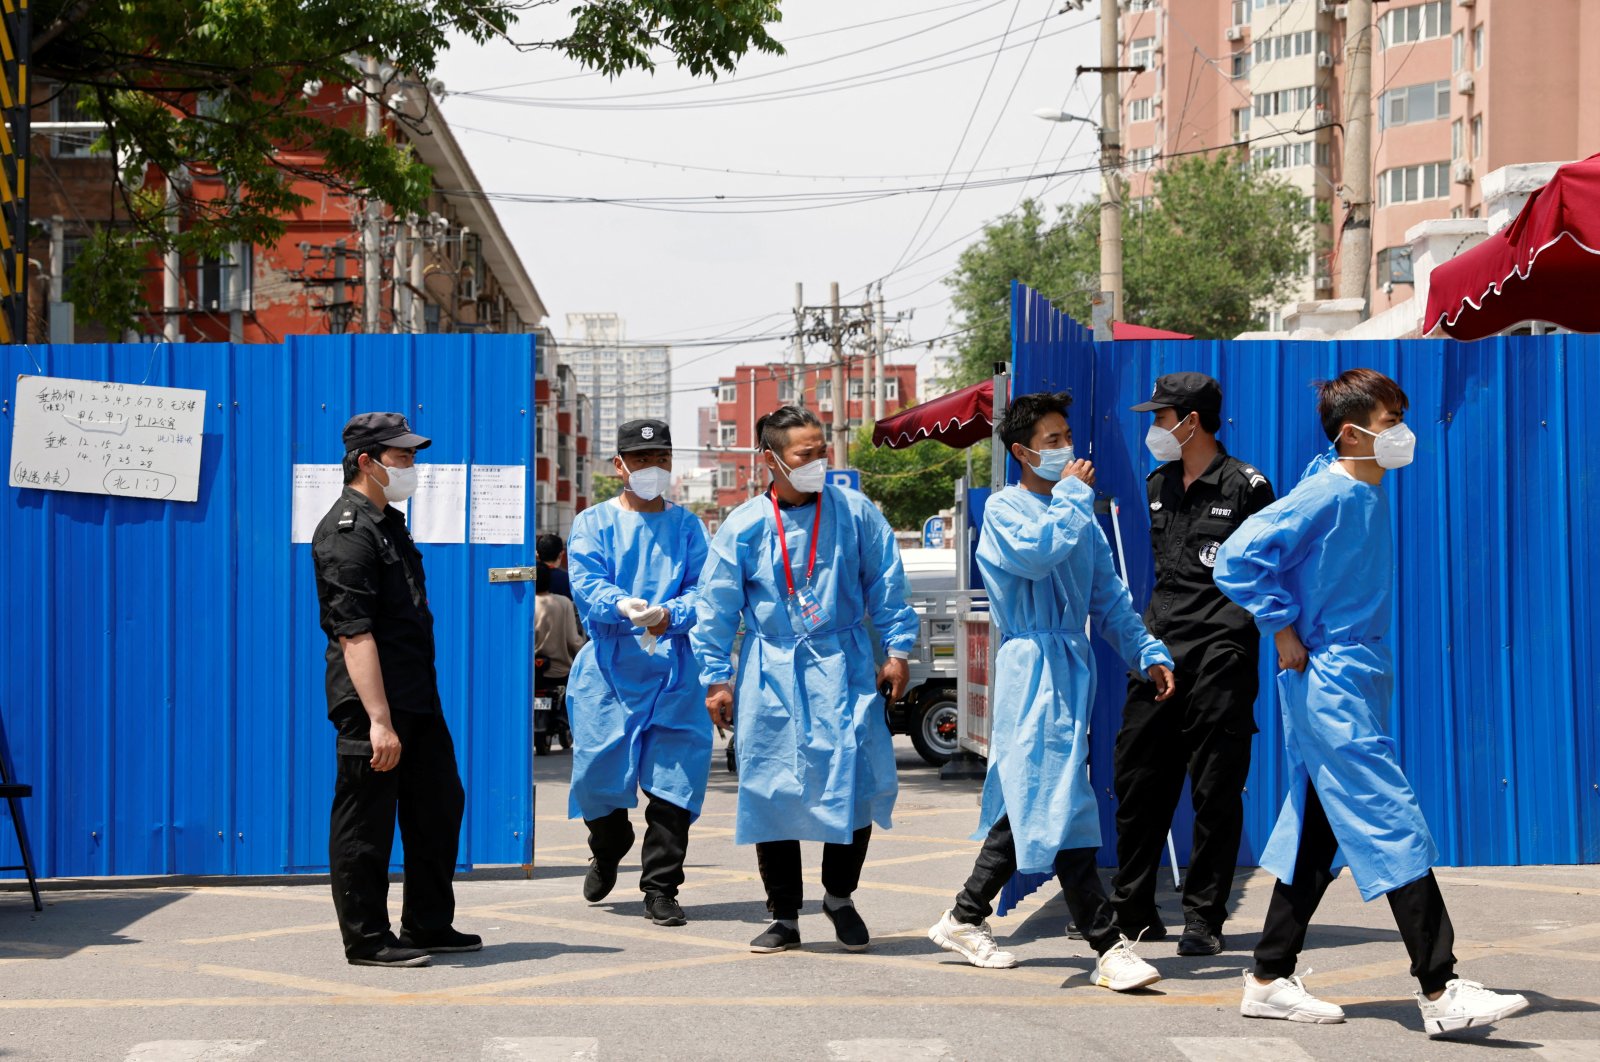 Workers in protective suits walk through the gate of a barricaded residential area under lockdown amid the COVID-19 outbreak, Beijing, China, May 17, 2022. (Reuters Photo)